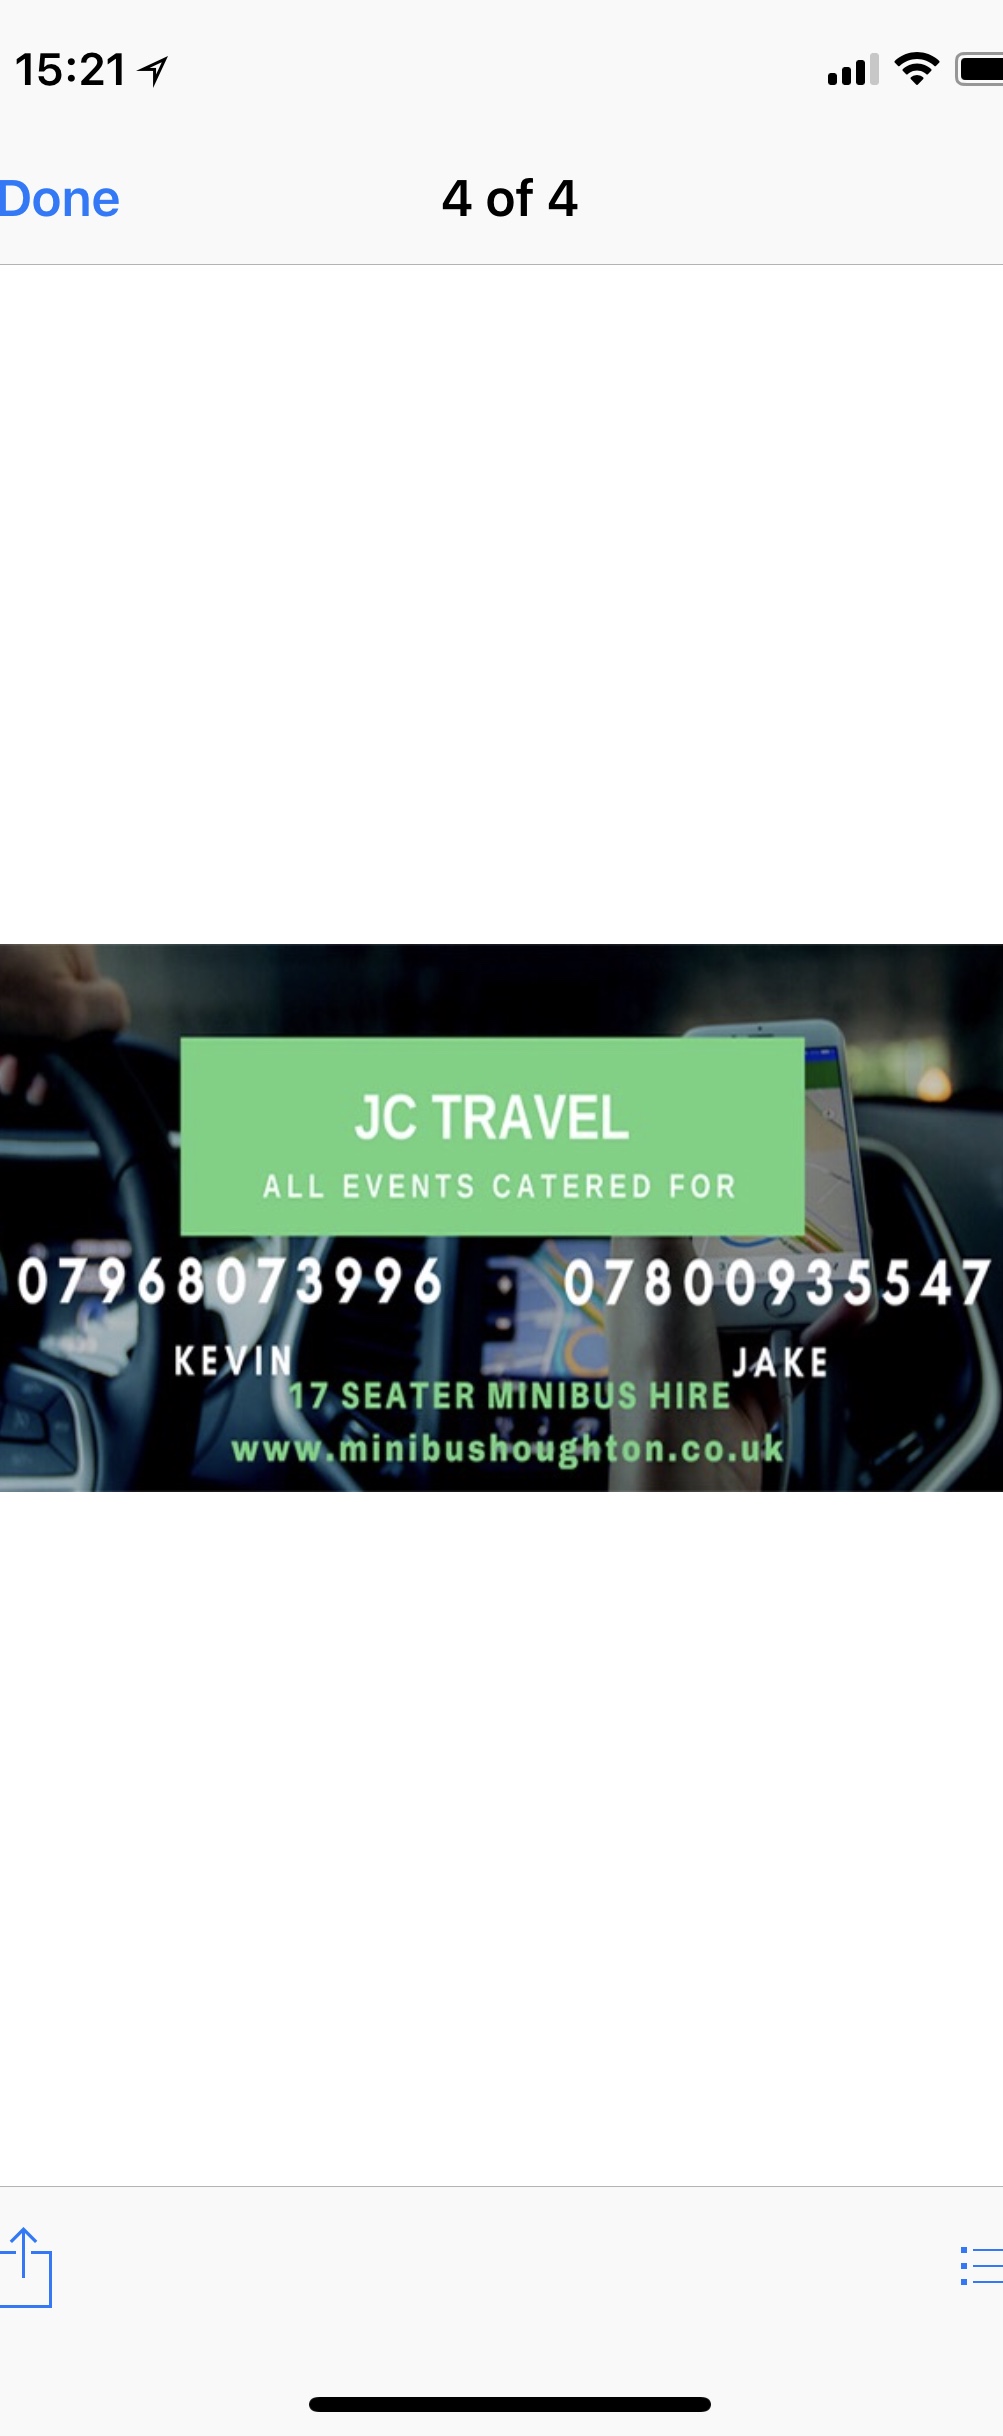 Logo of JC Travel Travel Agencies And Services In Houghton Le Spring, Tyne And Wear